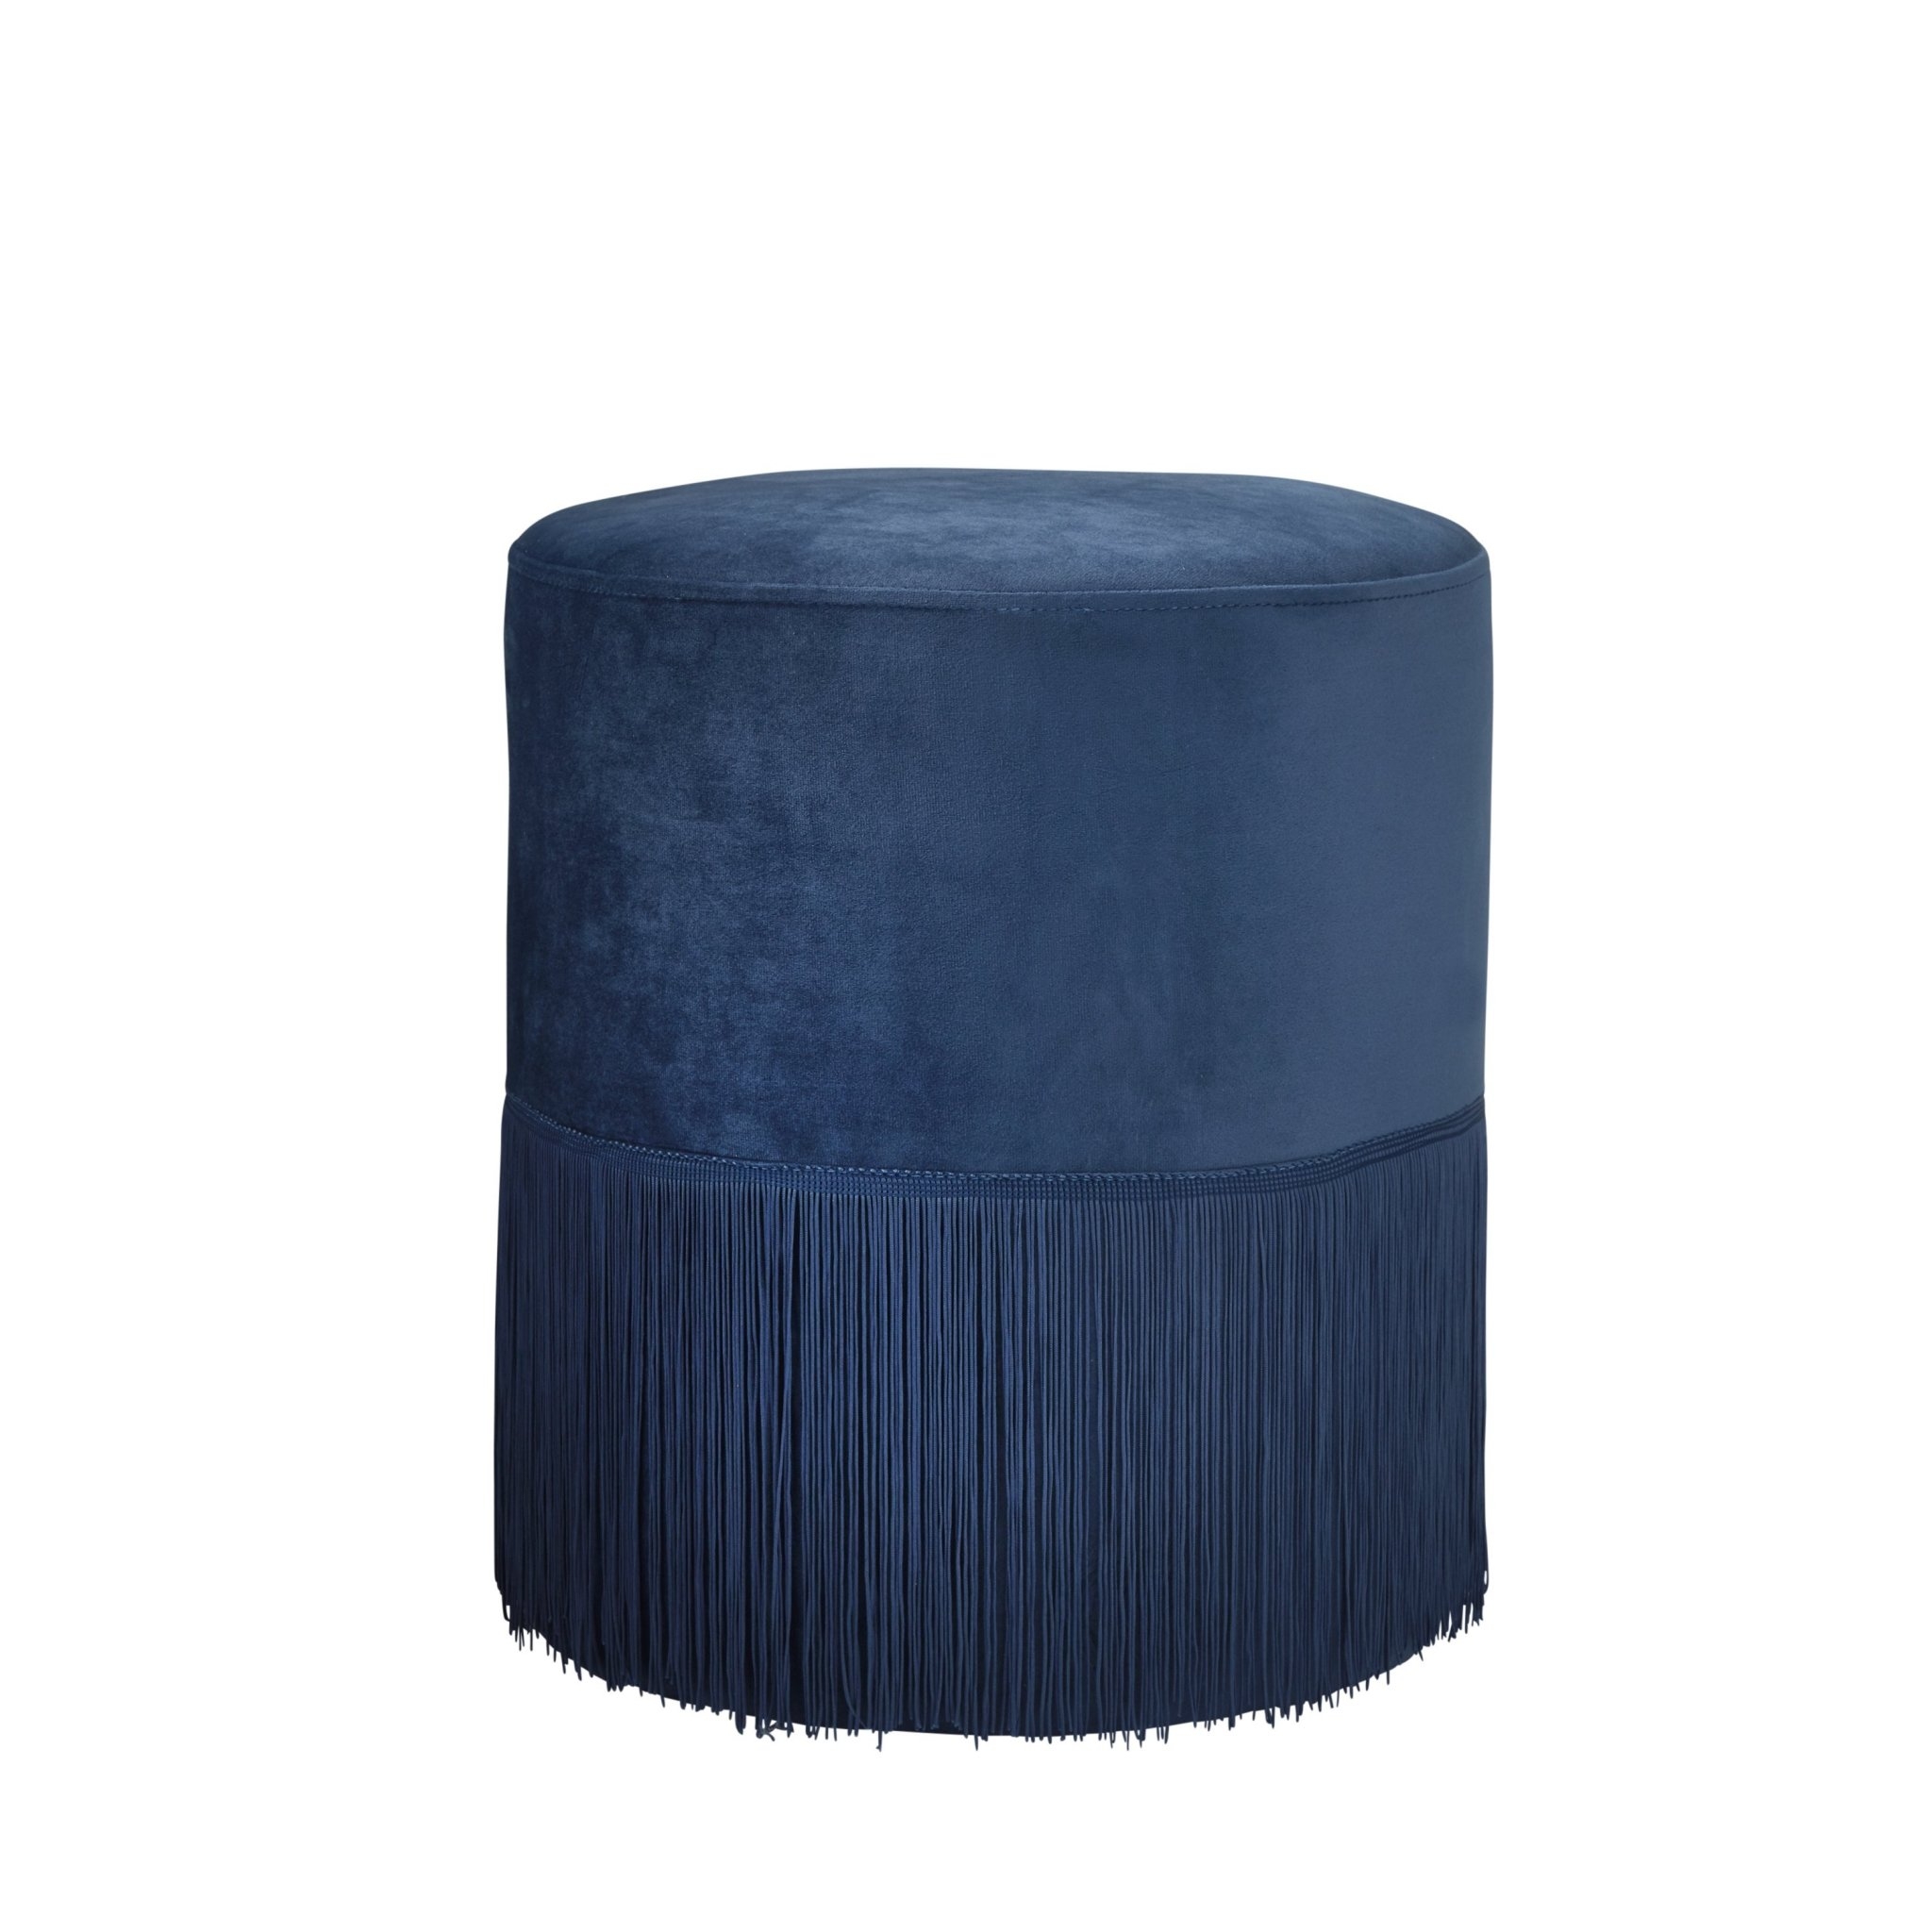 Native Home & Lifestyle Round Stool In Blue Velvet With Tassels 38 x 38 x 43cm – Furniture & Homeware – The Luxe Home